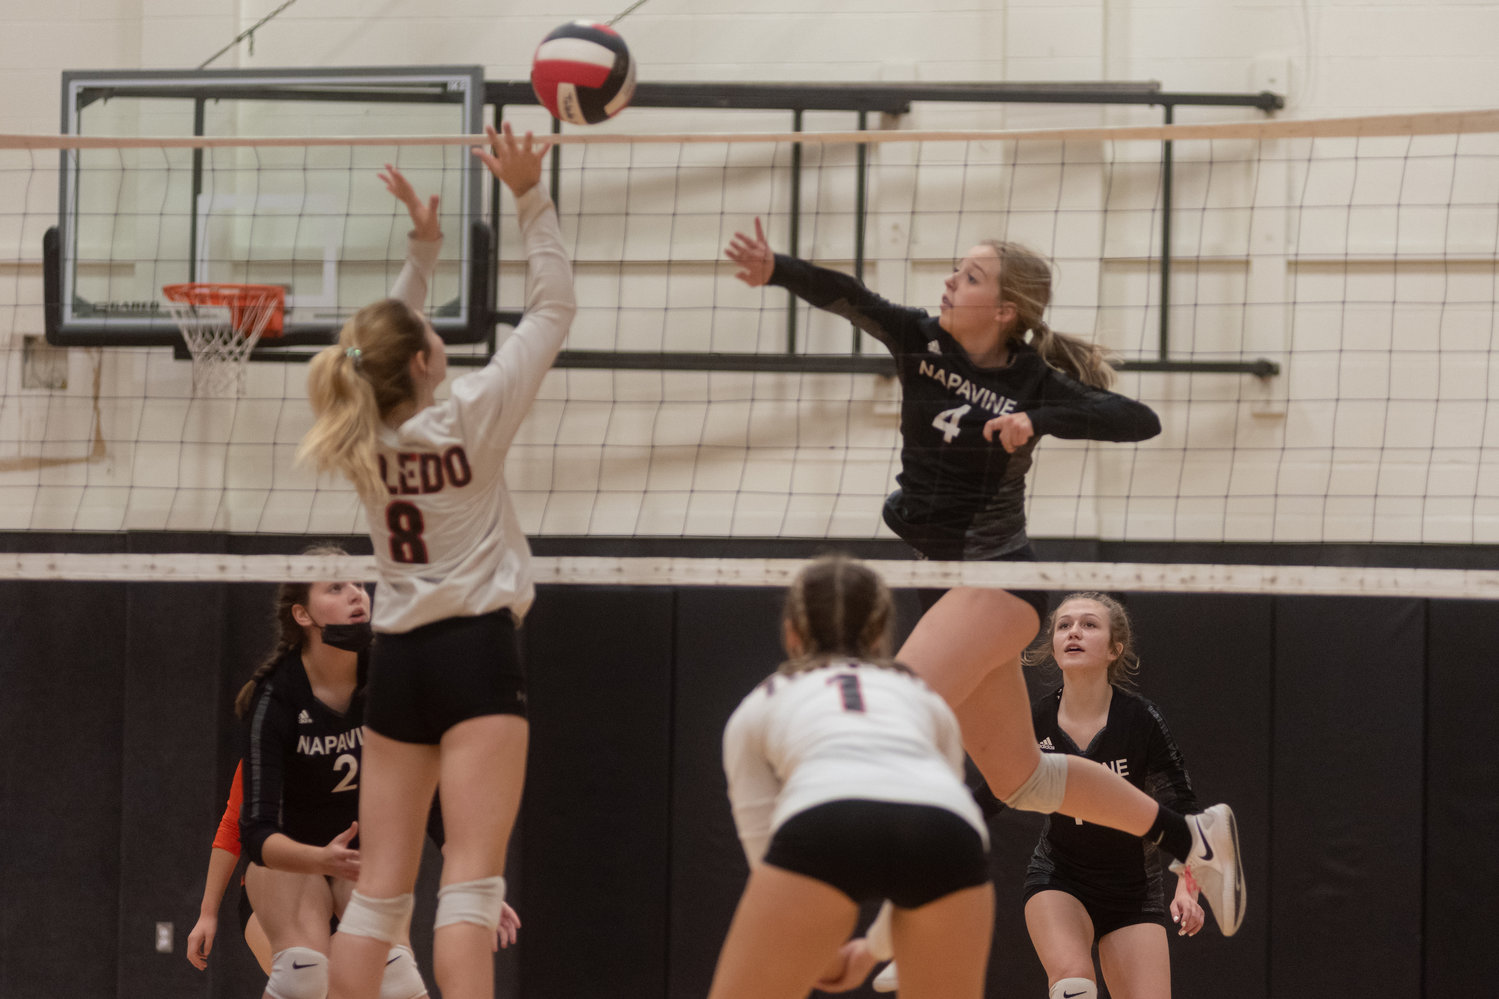 Napavine sophomore outside hitter Grace Gall goes up for a spike against Toledo Oct. 19.